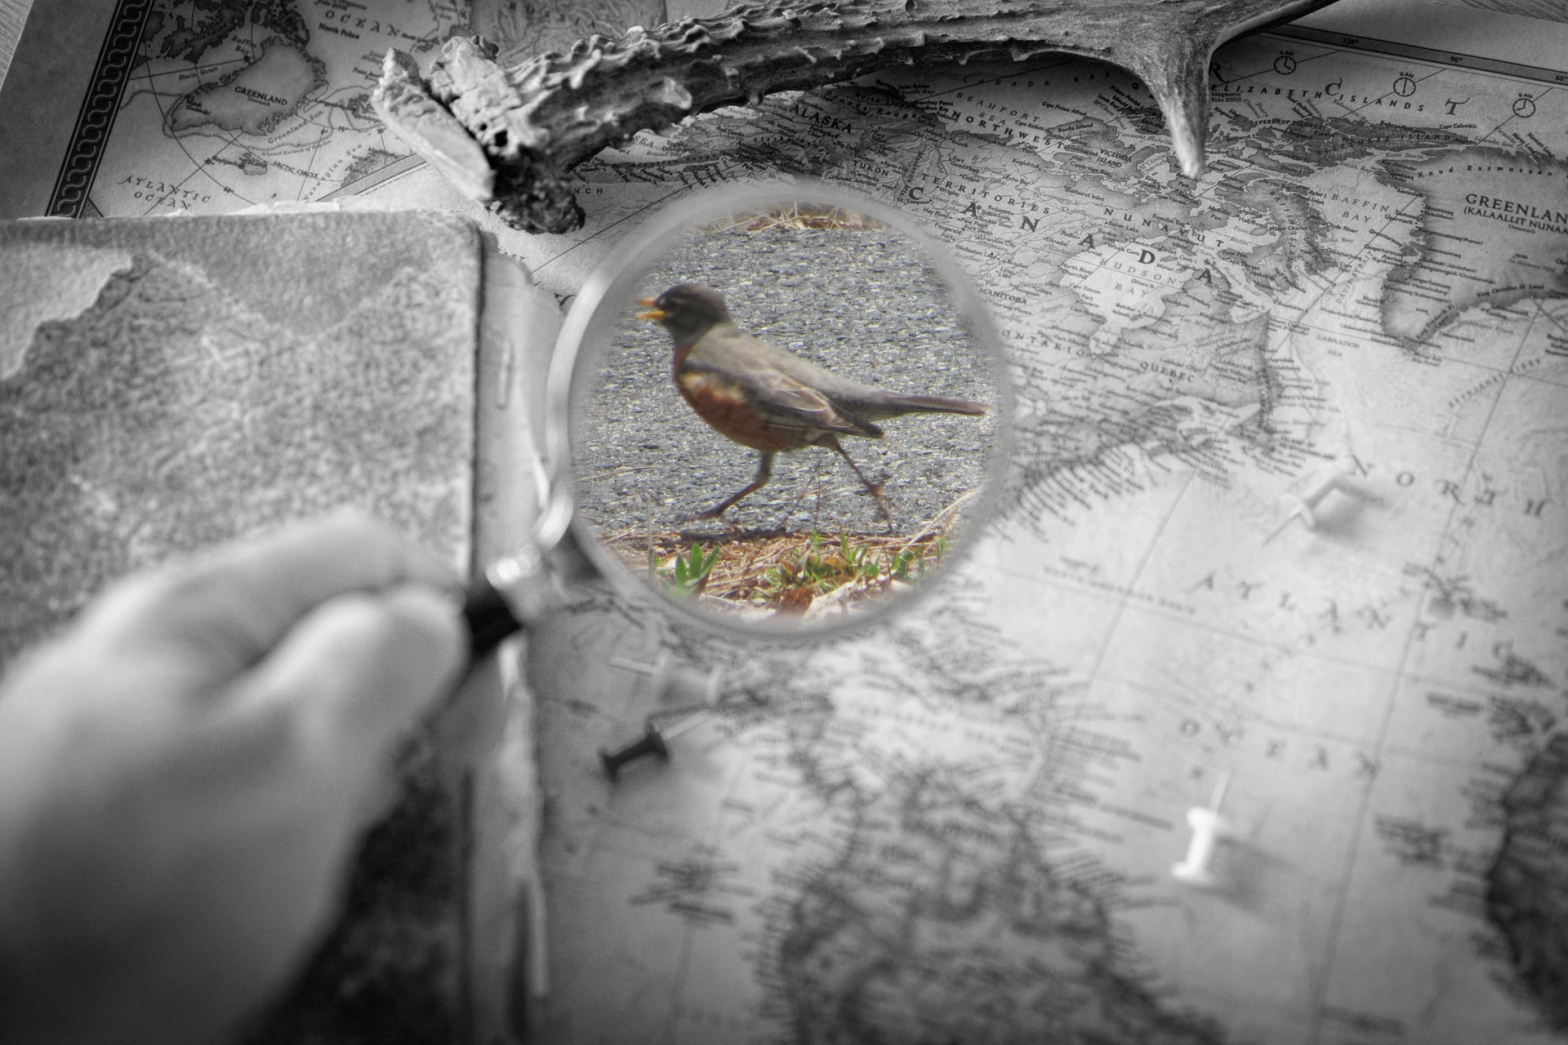 A black and white photo of someone holding a magnifying glass. there is a robin in the center of the image